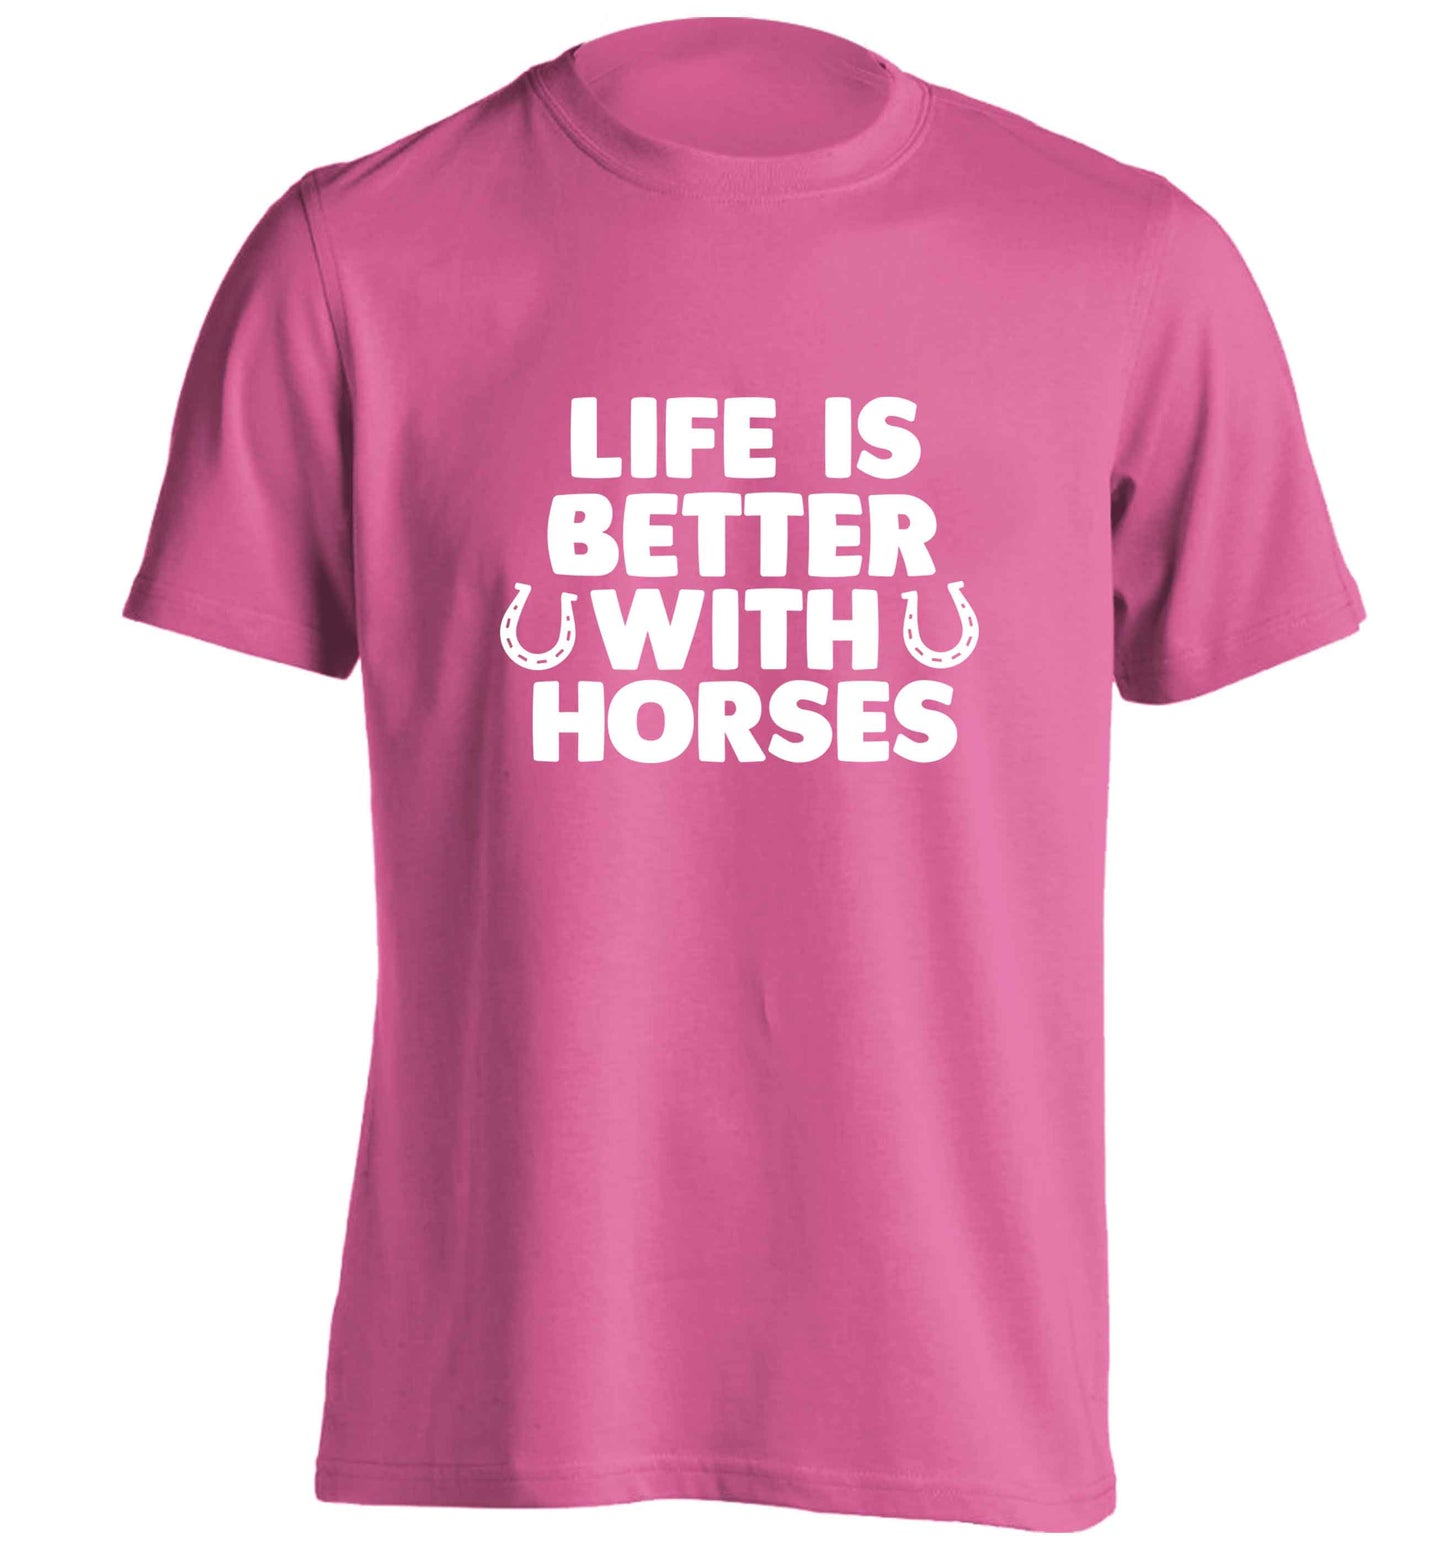 Life is better with horses adults unisex pink Tshirt 2XL